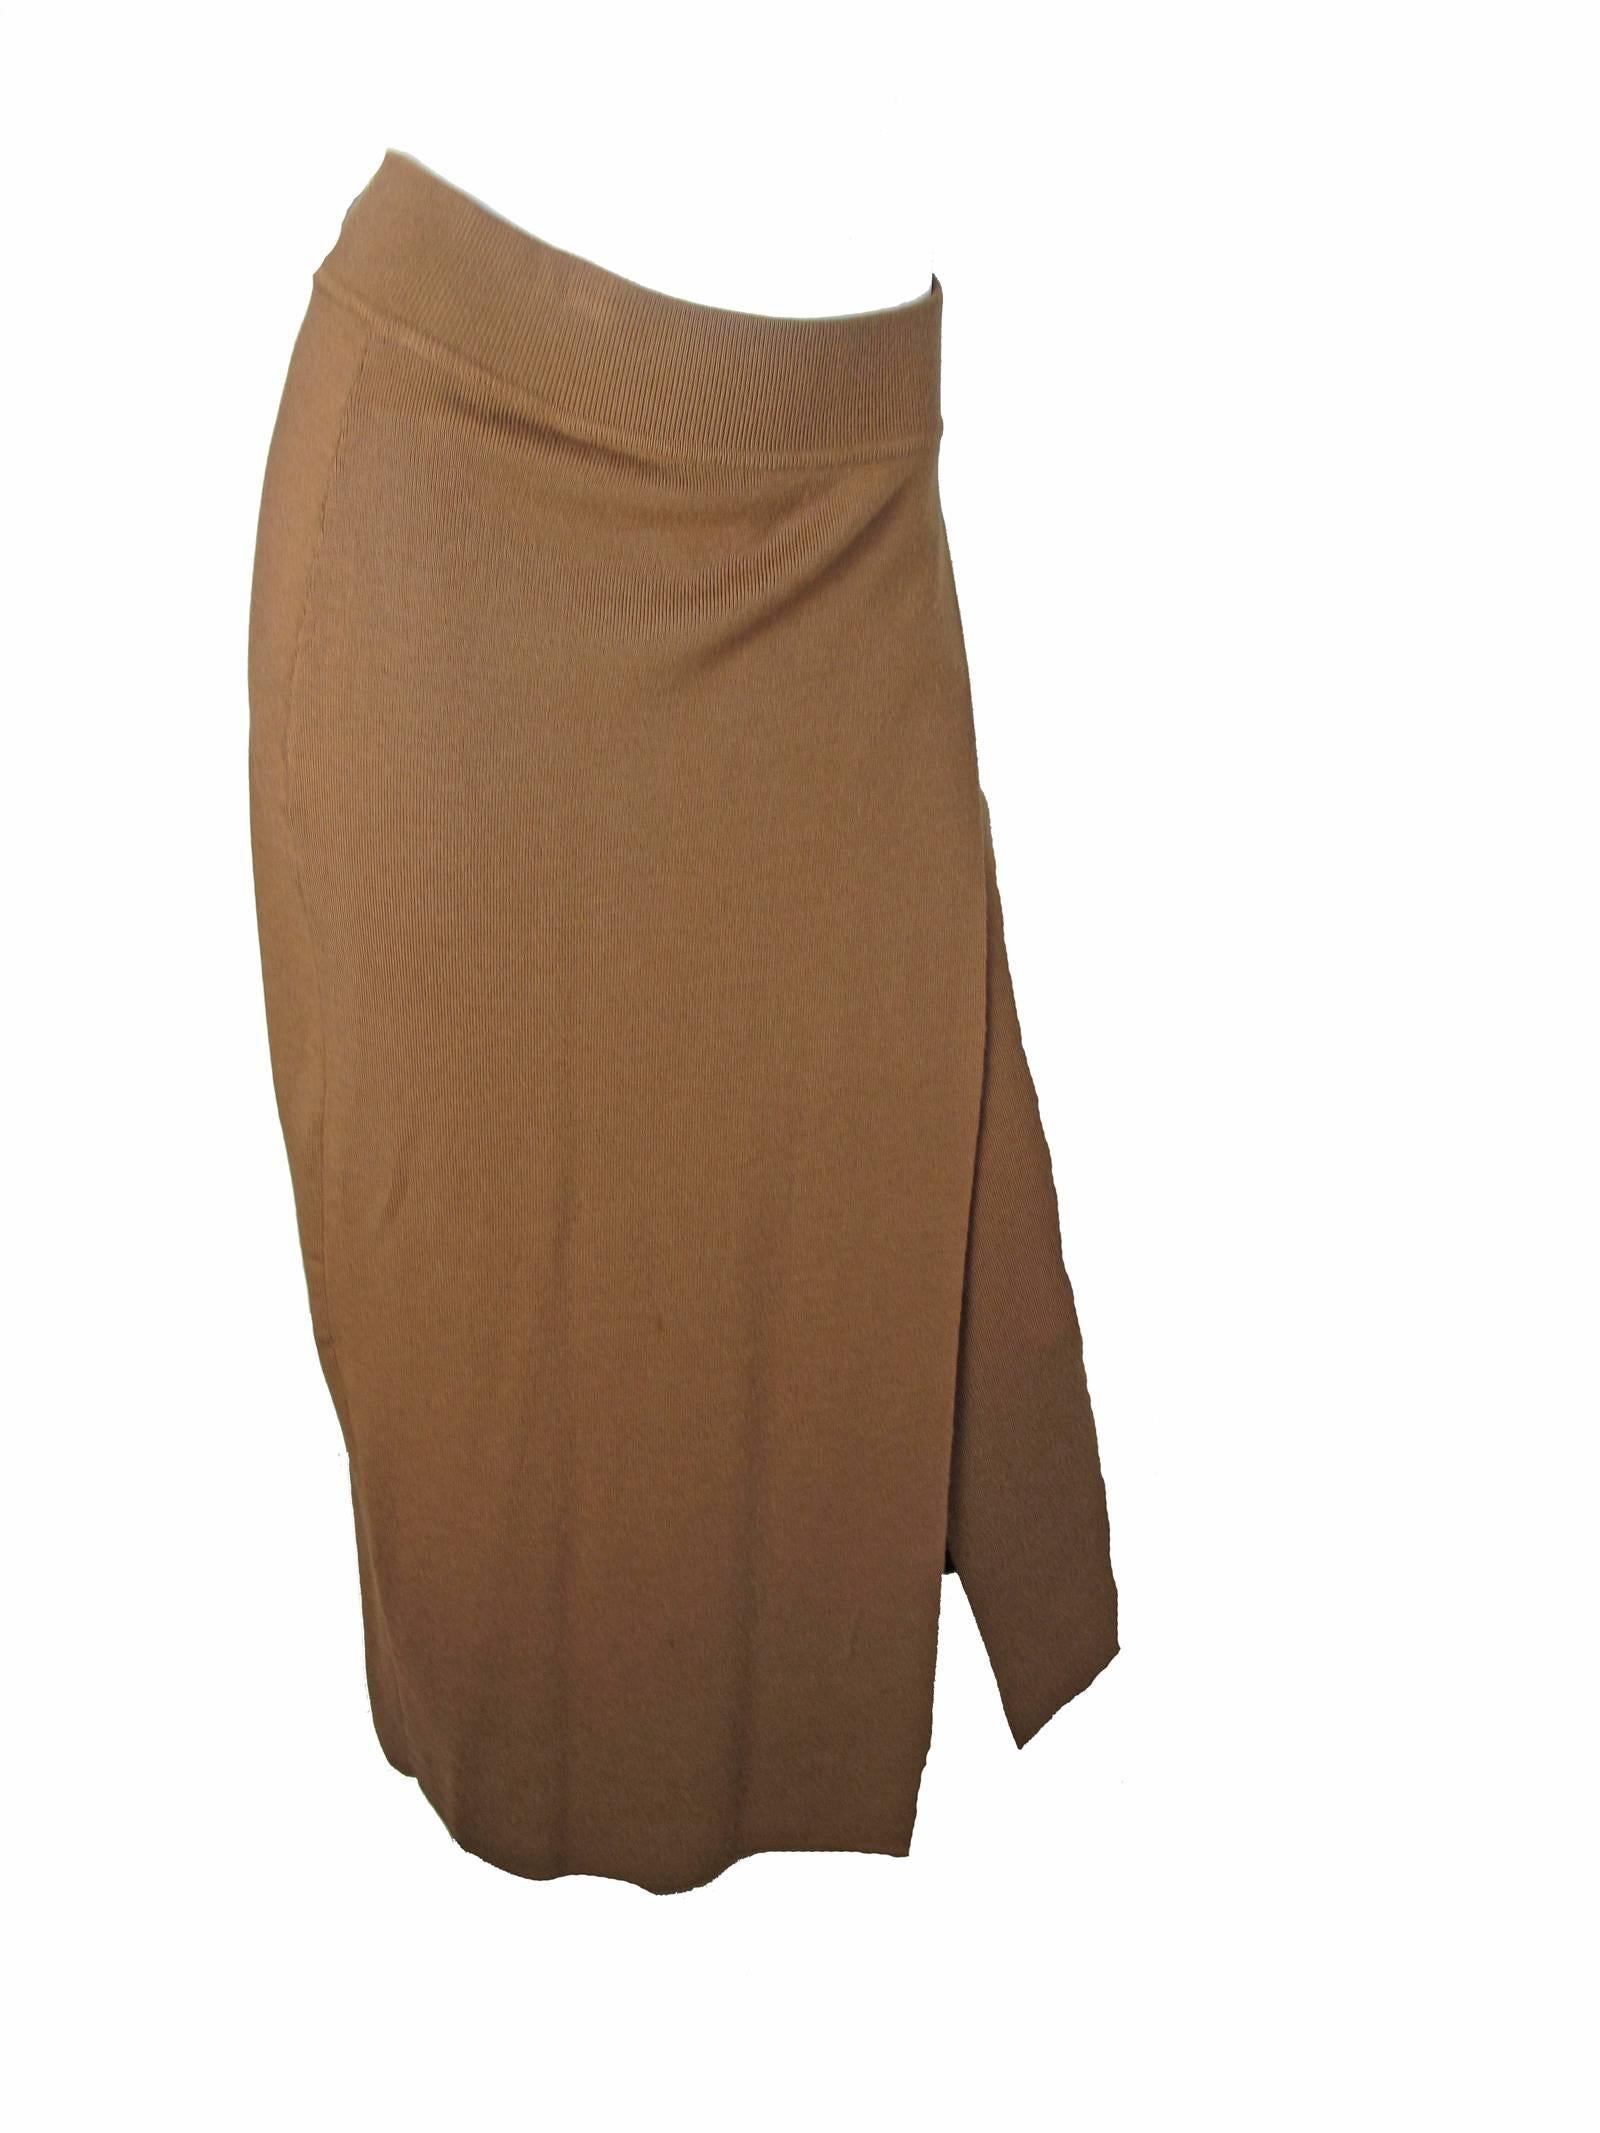 Donna Karan for Anne Klein 1980s brown knit oversized cardigan and skirt.  Size Medium.  Condition: Excellent. 

We accept returns for refund, please see our terms.  We offer free ground shipping within the US.  Please let us know if you have any